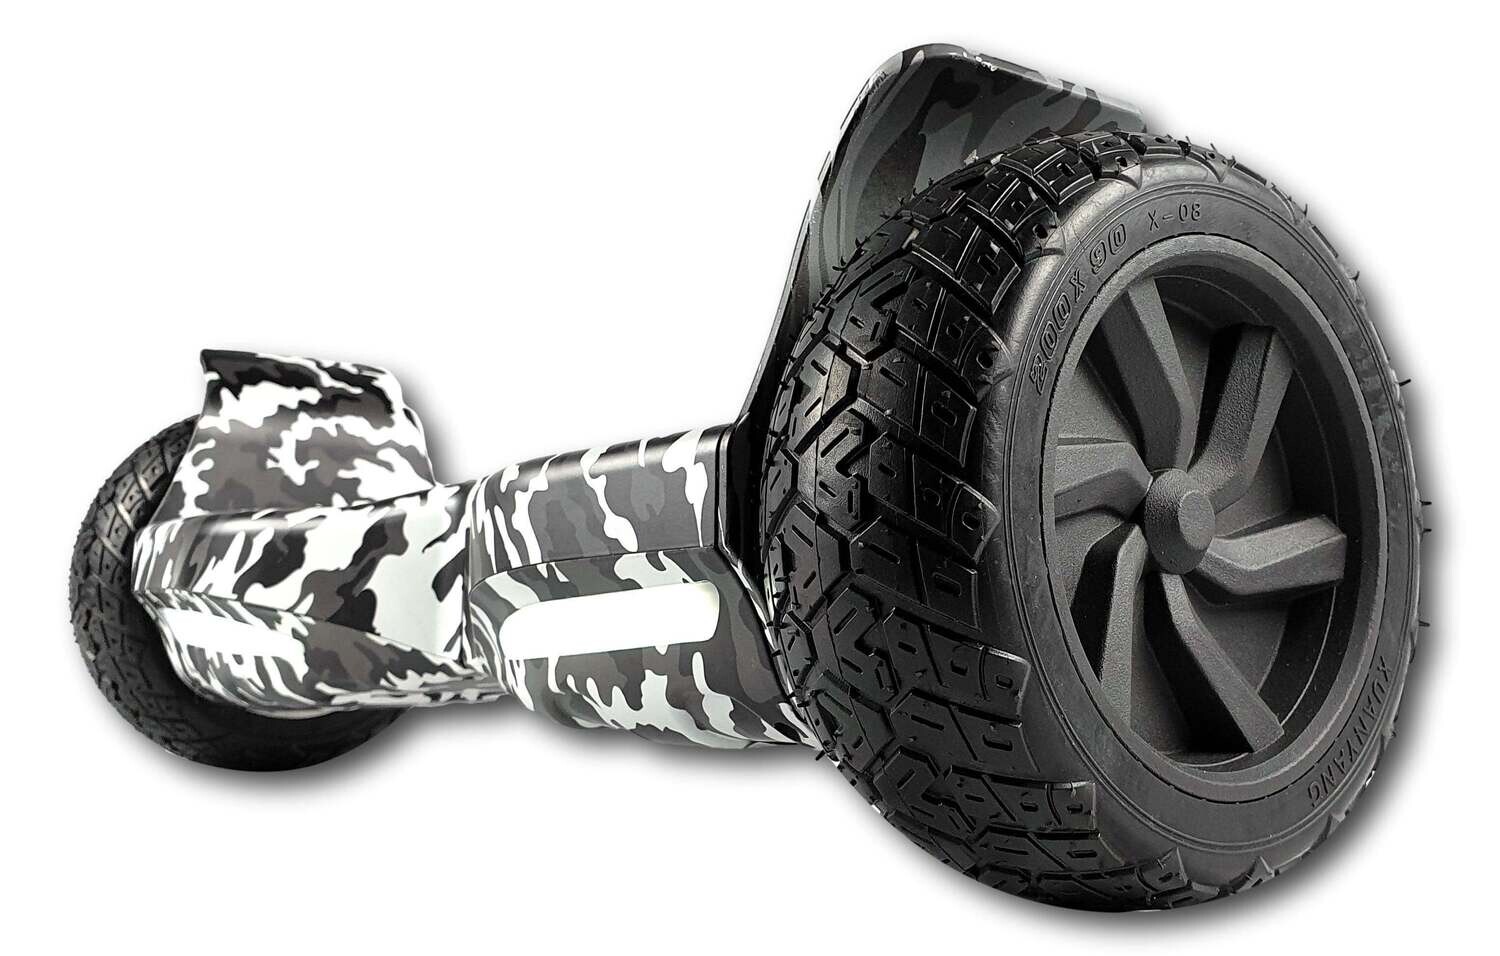 Camouflage 8.5" All Terrain Off Road Hoverboard Segway Hummer